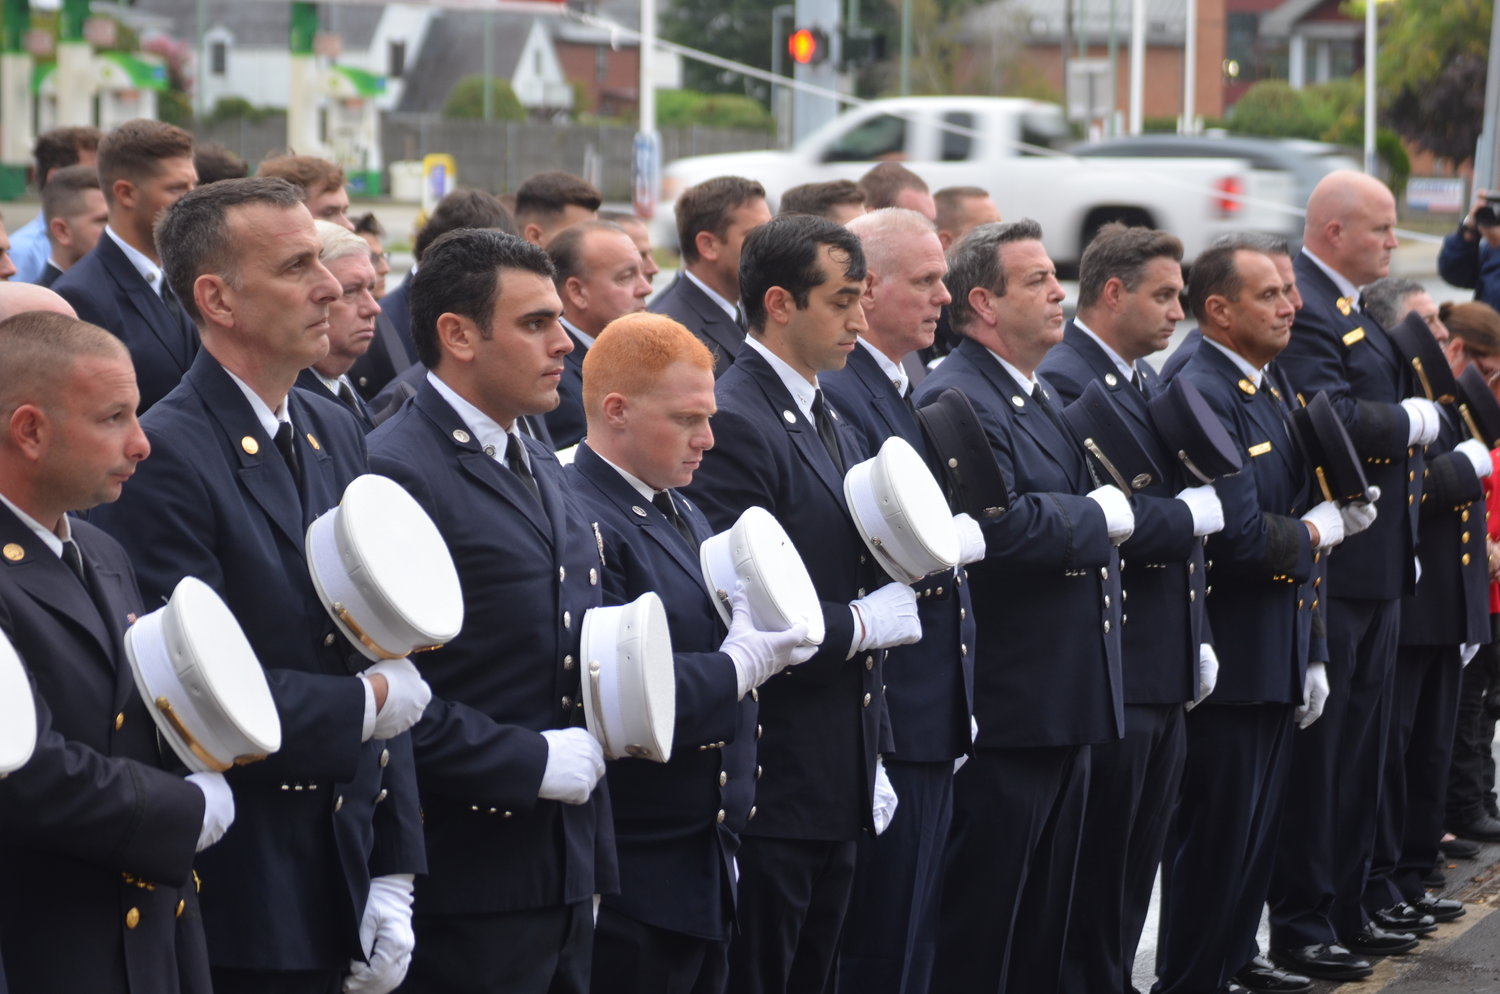 Firefighters in Merrick lined up, with their caps across their hearts, to commemorate the solemn day.